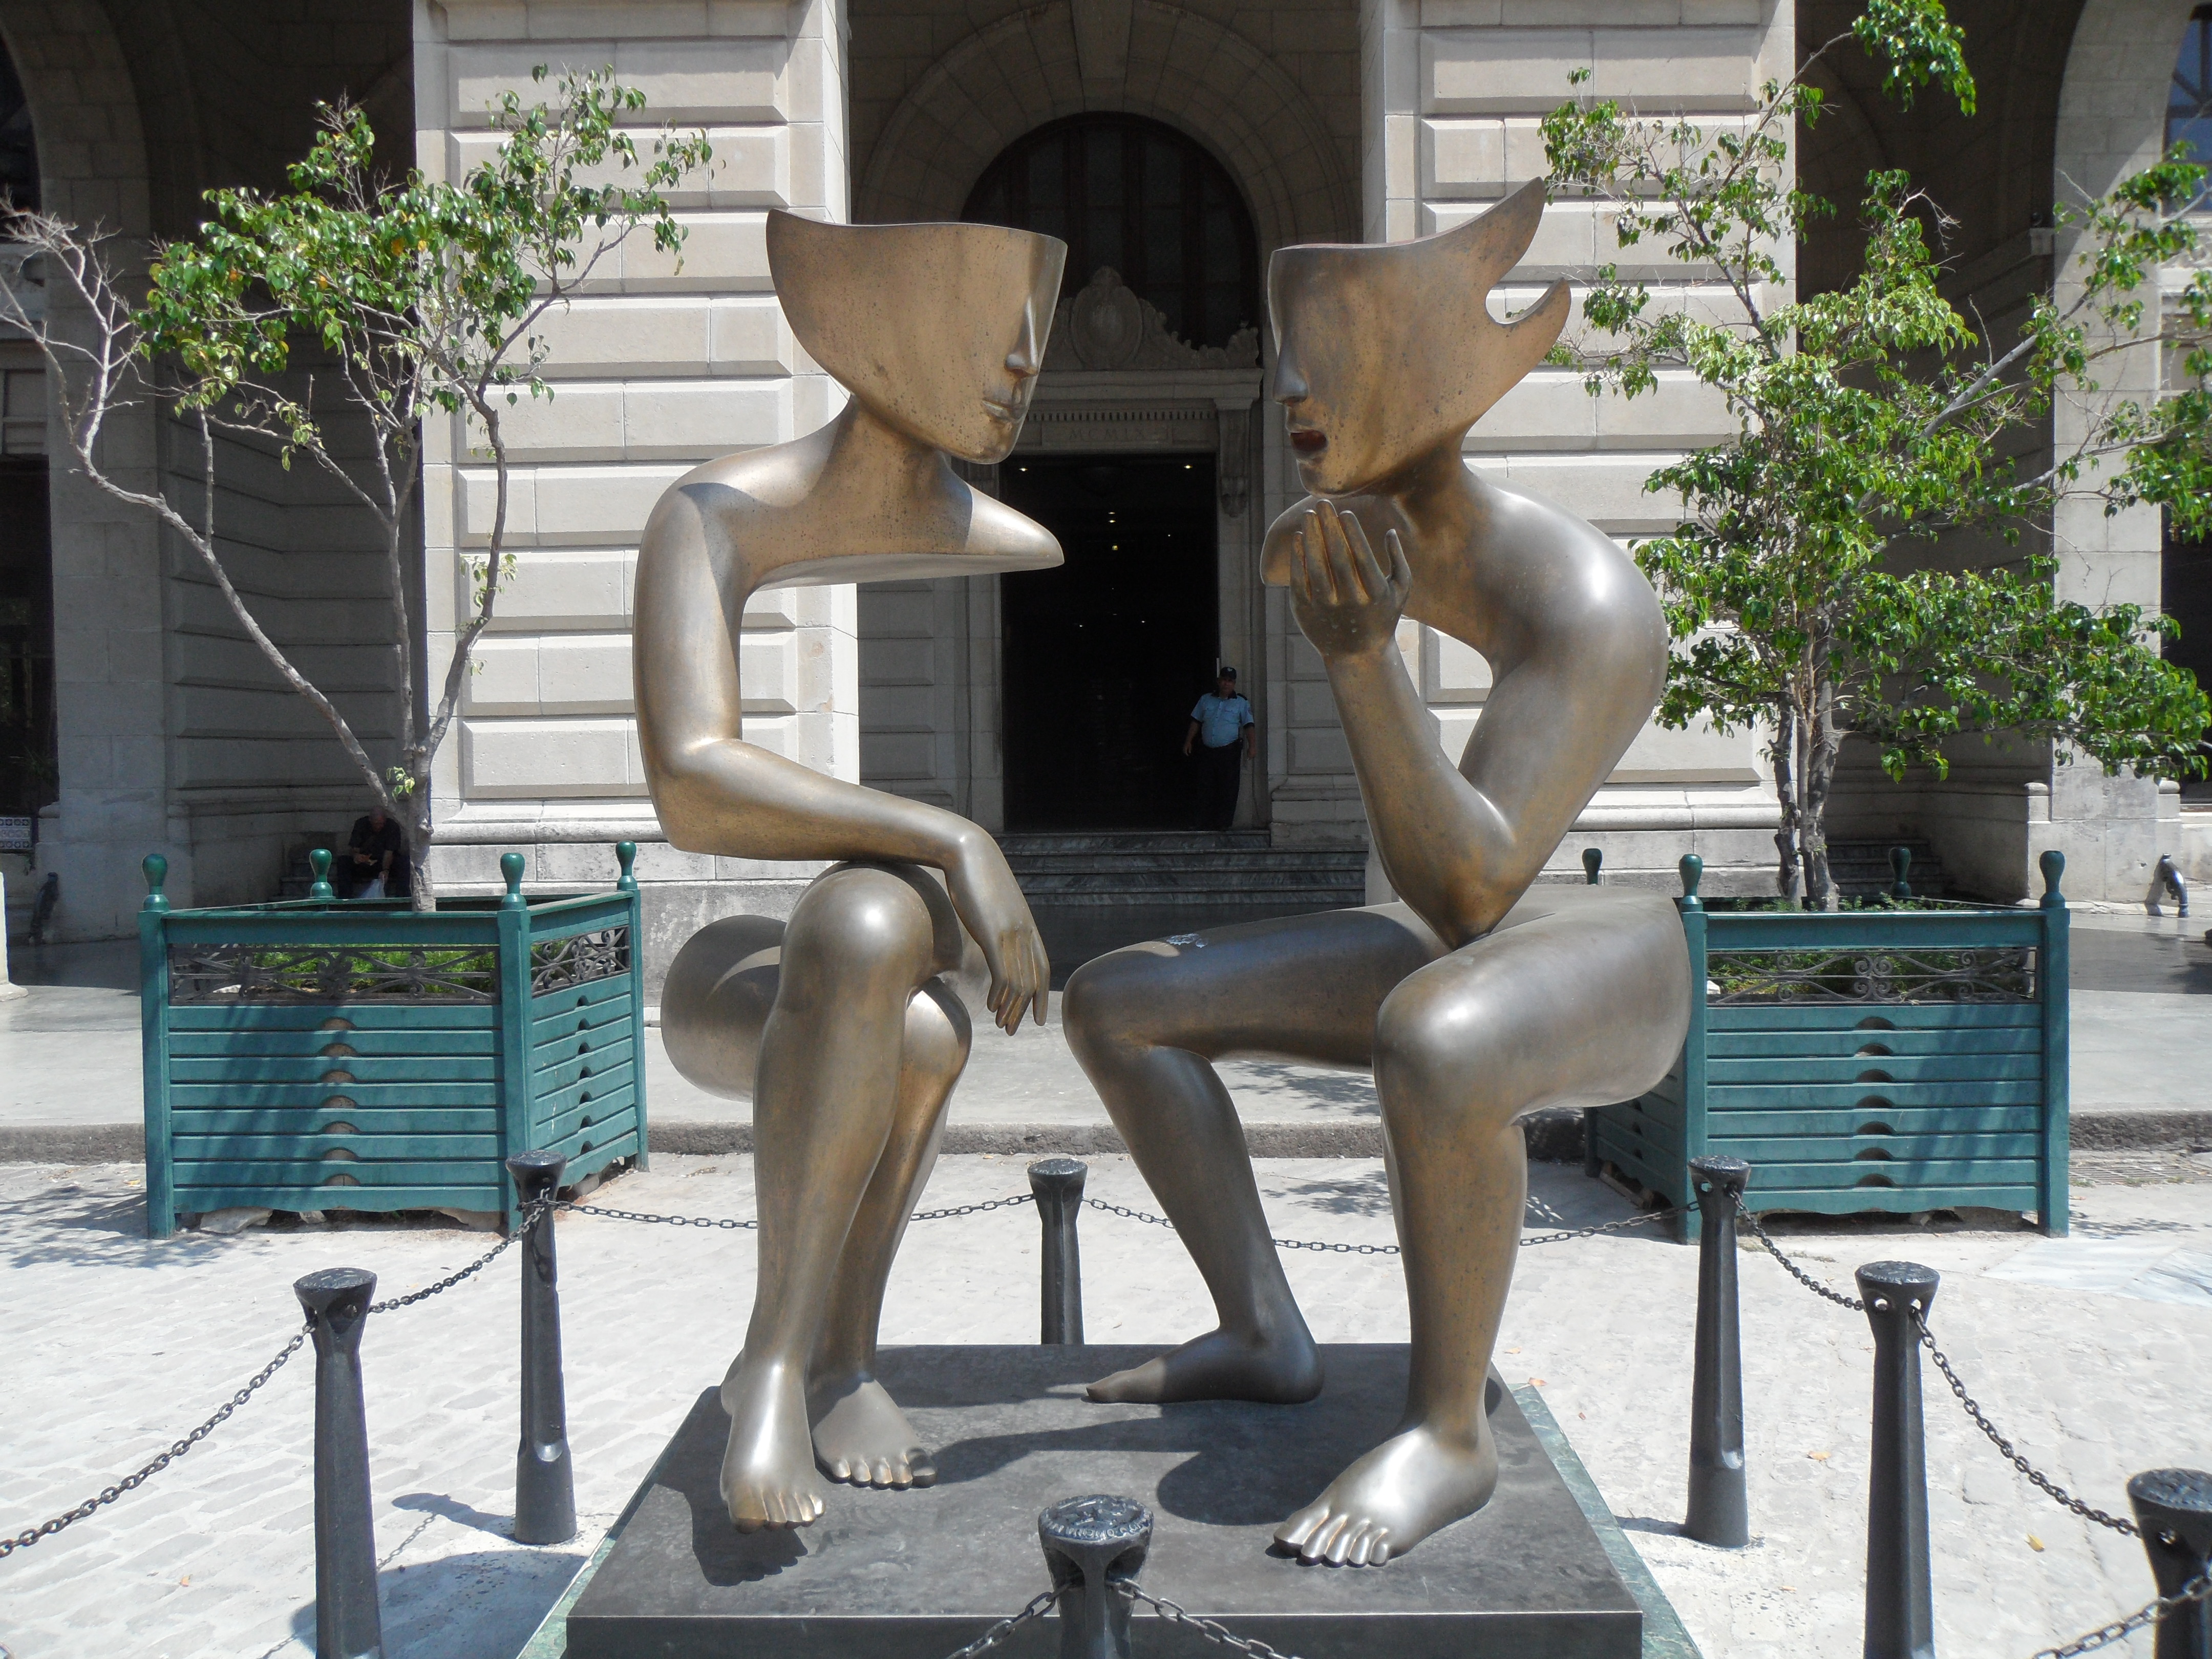 Abstract sculpture of two figures sitting